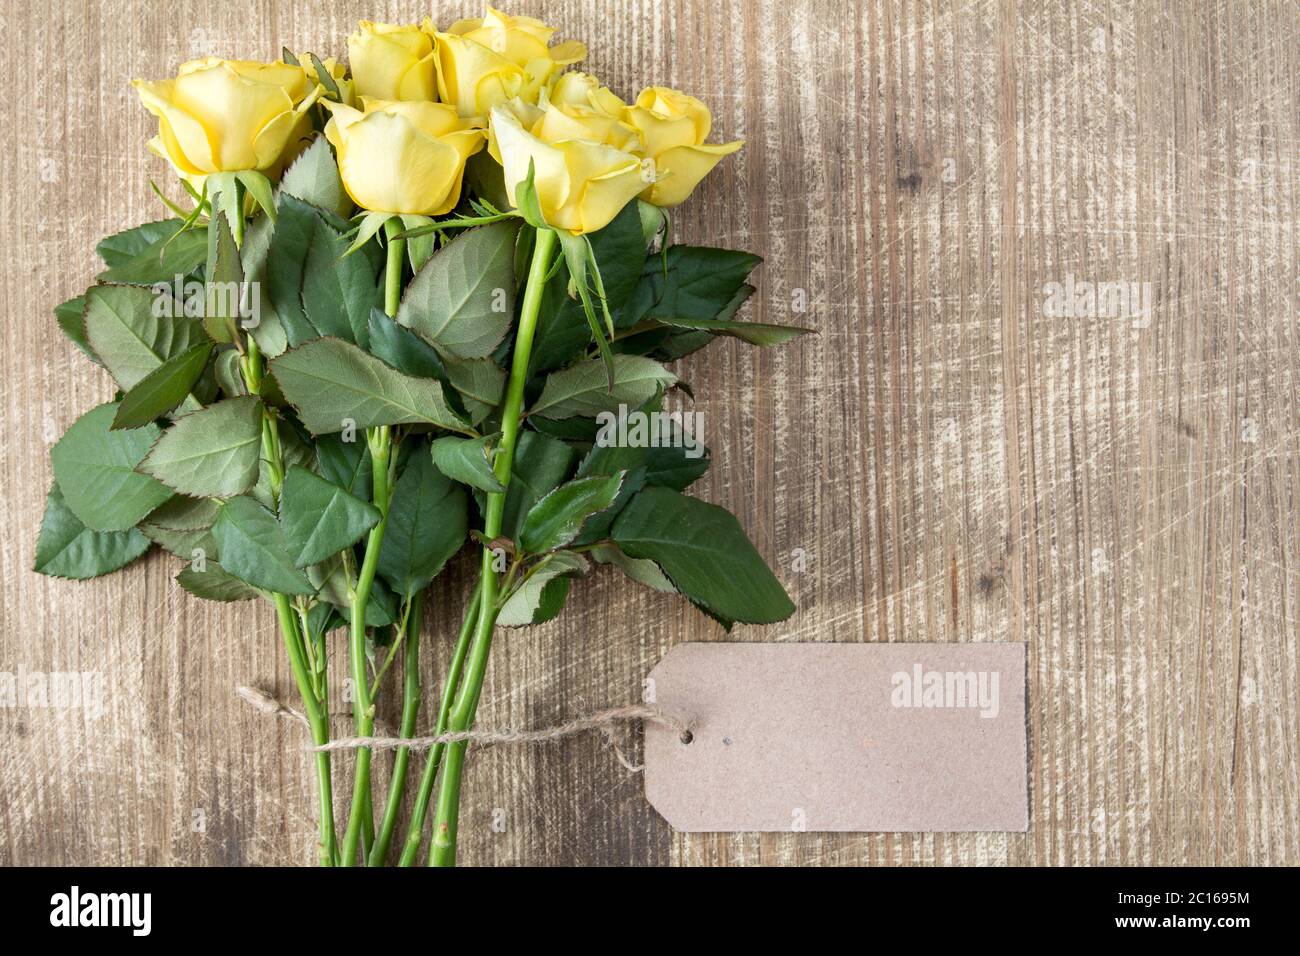 Bunch of yellow roses with blank tag Stock Photo